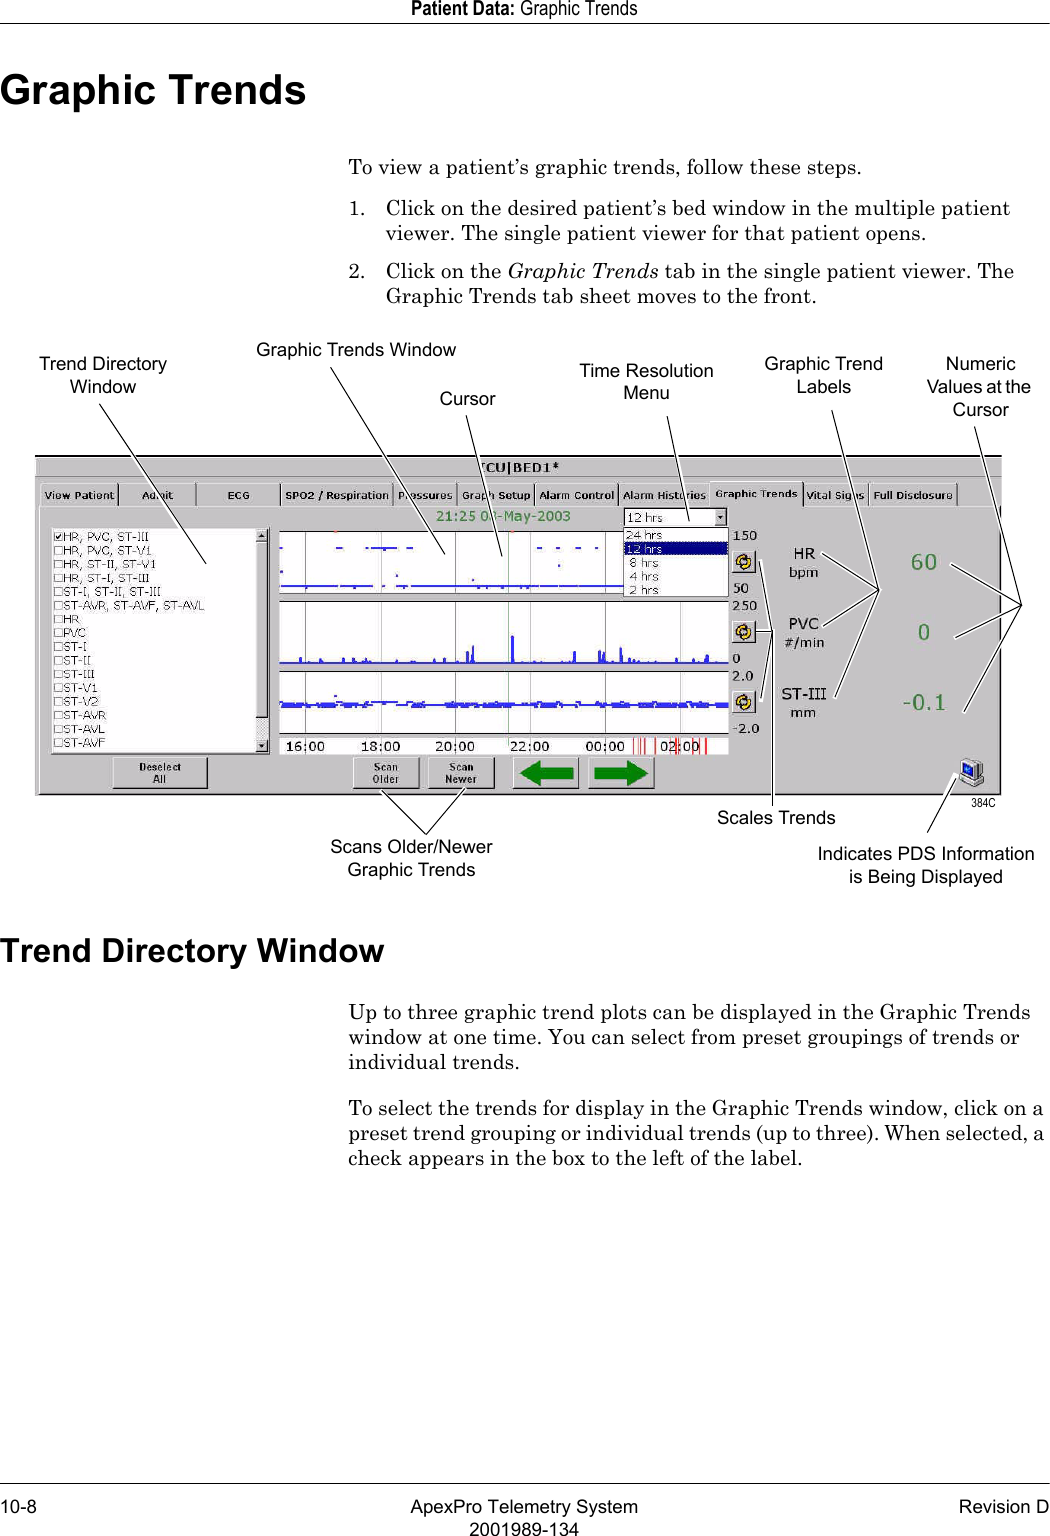 10-8 ApexPro Telemetry System Revision D2001989-134Patient Data: Graphic TrendsGraphic TrendsTo view a patient’s graphic trends, follow these steps.1. Click on the desired patient’s bed window in the multiple patient viewer. The single patient viewer for that patient opens.2. Click on the Graphic Trends tab in the single patient viewer. The Graphic Trends tab sheet moves to the front.Trend Directory WindowUp to three graphic trend plots can be displayed in the Graphic Trends window at one time. You can select from preset groupings of trends or individual trends.To select the trends for display in the Graphic Trends window, click on a preset trend grouping or individual trends (up to three). When selected, a check appears in the box to the left of the label.Trend Directory WindowGraphic Trends Window Graphic Trend LabelsNumeric Values at the CursorTime Resolution MenuScans Older/Newer Graphic TrendsCursor 384CIndicates PDS Information is Being DisplayedScales Trends